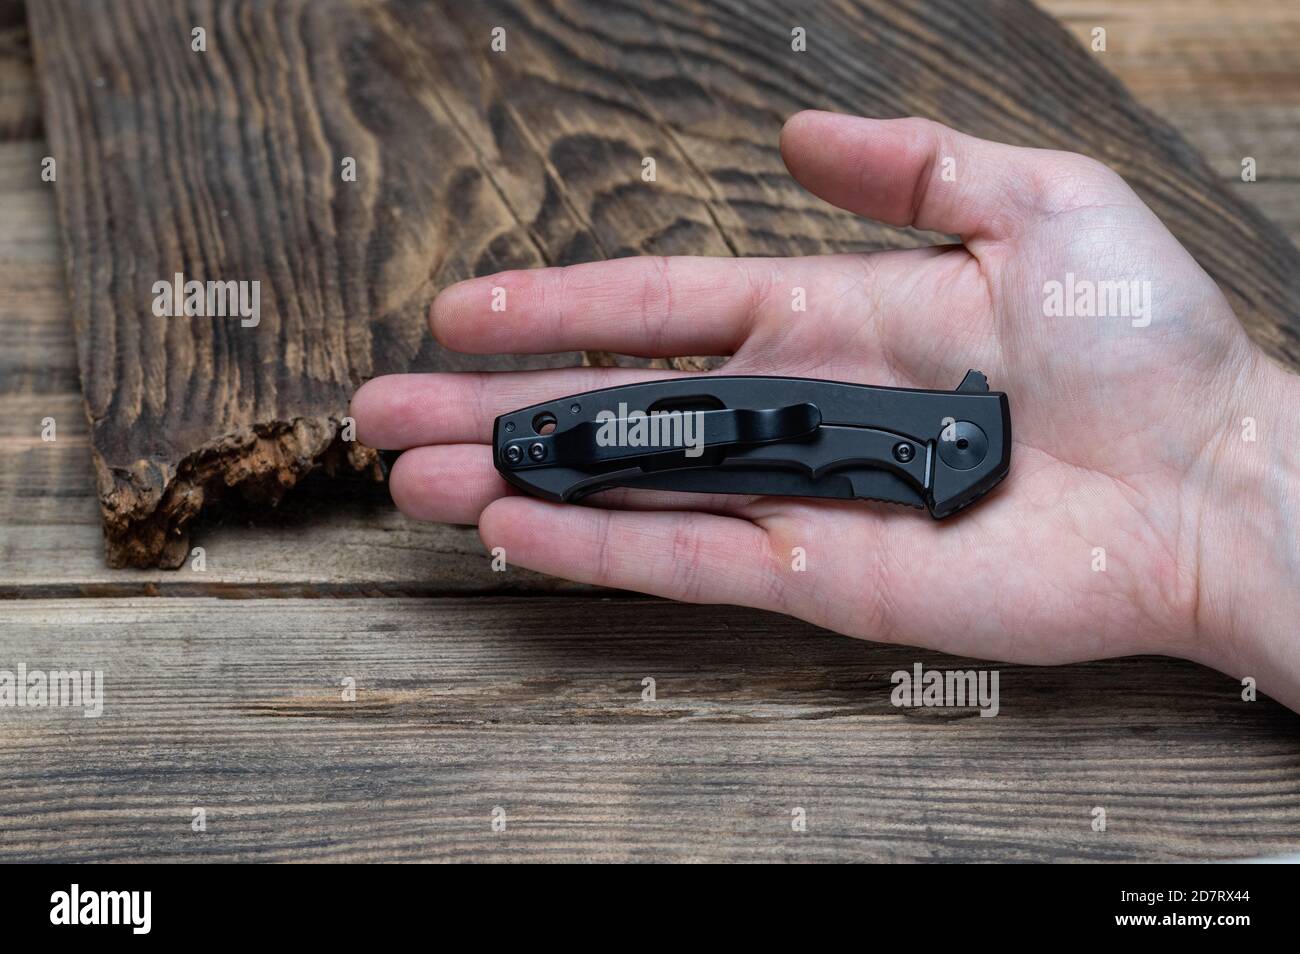 The reverse side of the knife with a clip and a side lock. Small knife in the palm. Front view. Stock Photo